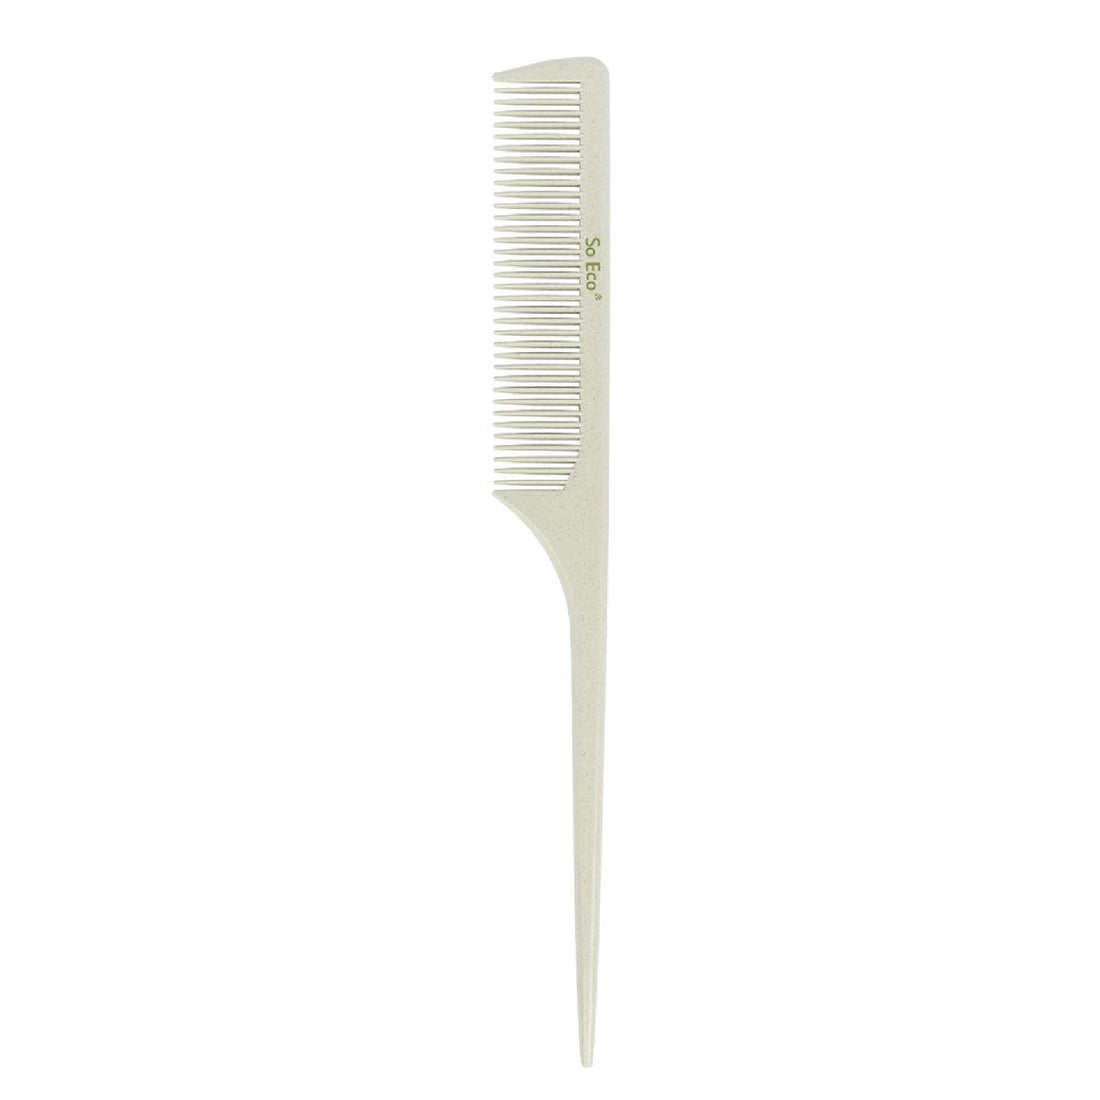 So Eco Biodegradable Tail Comb